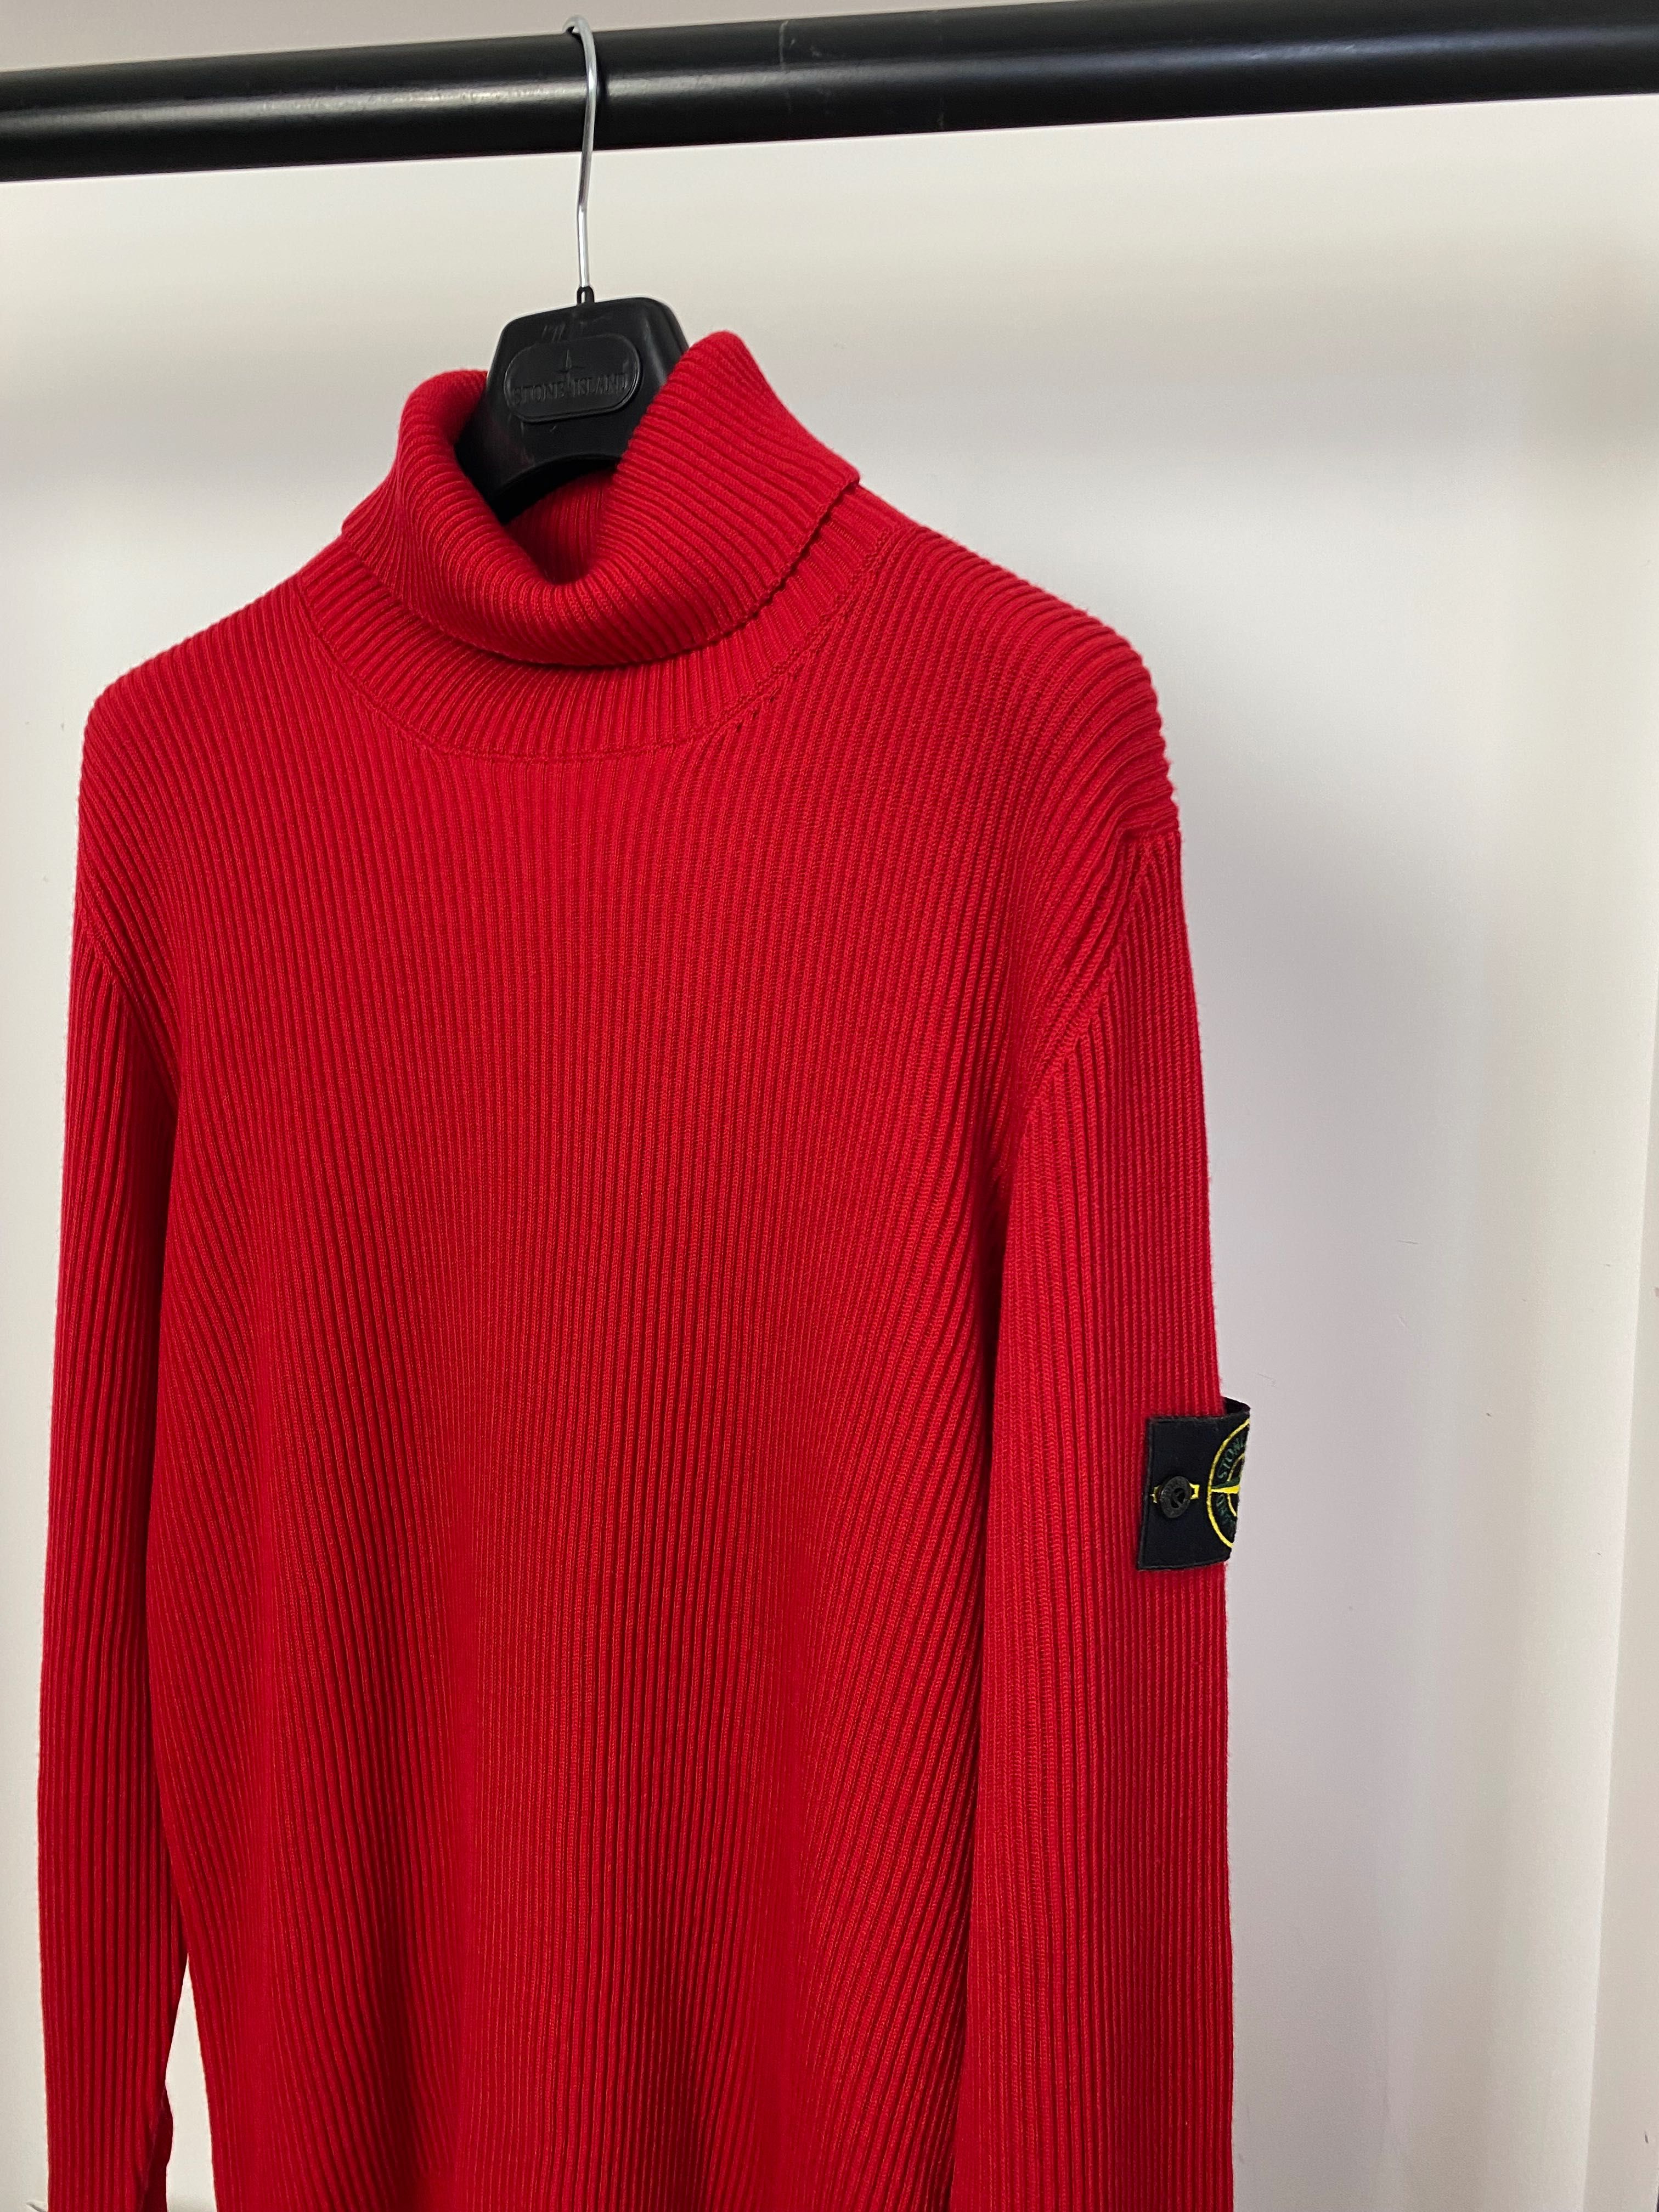 Stone island
Compass-patch roll-neck jumper